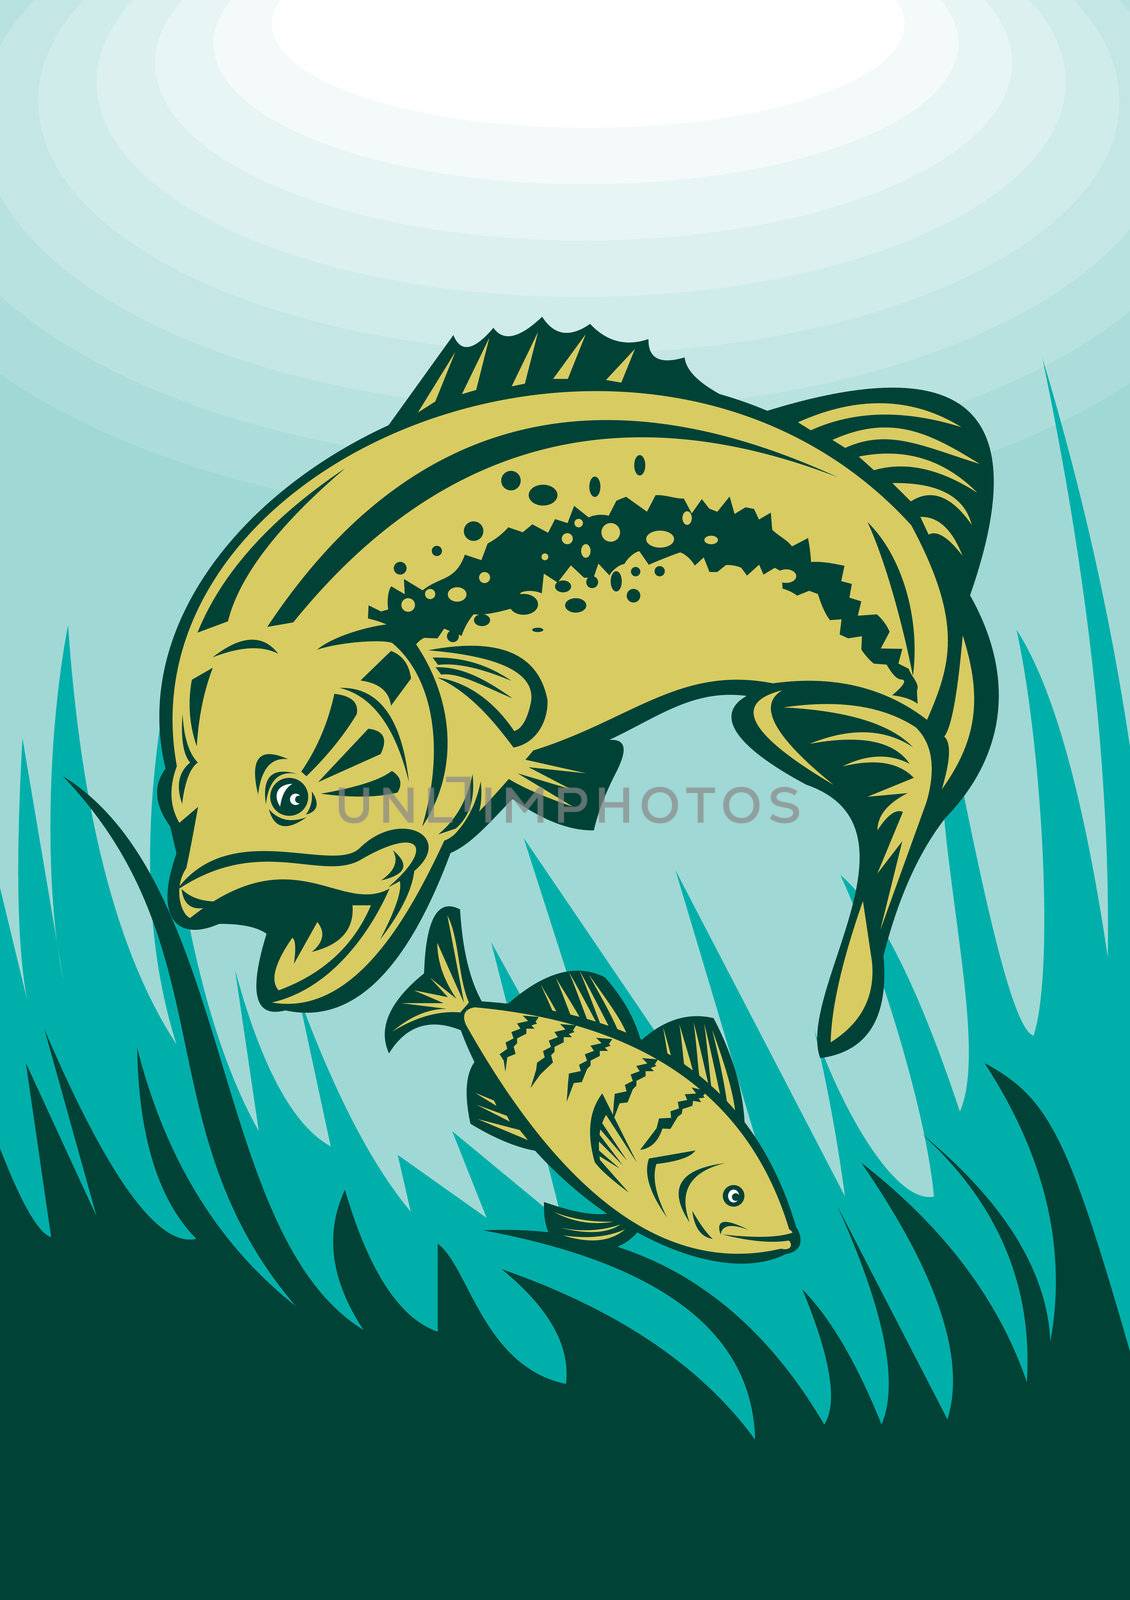 illustration of a largemouth bass preying on perch fish viewed underwater 